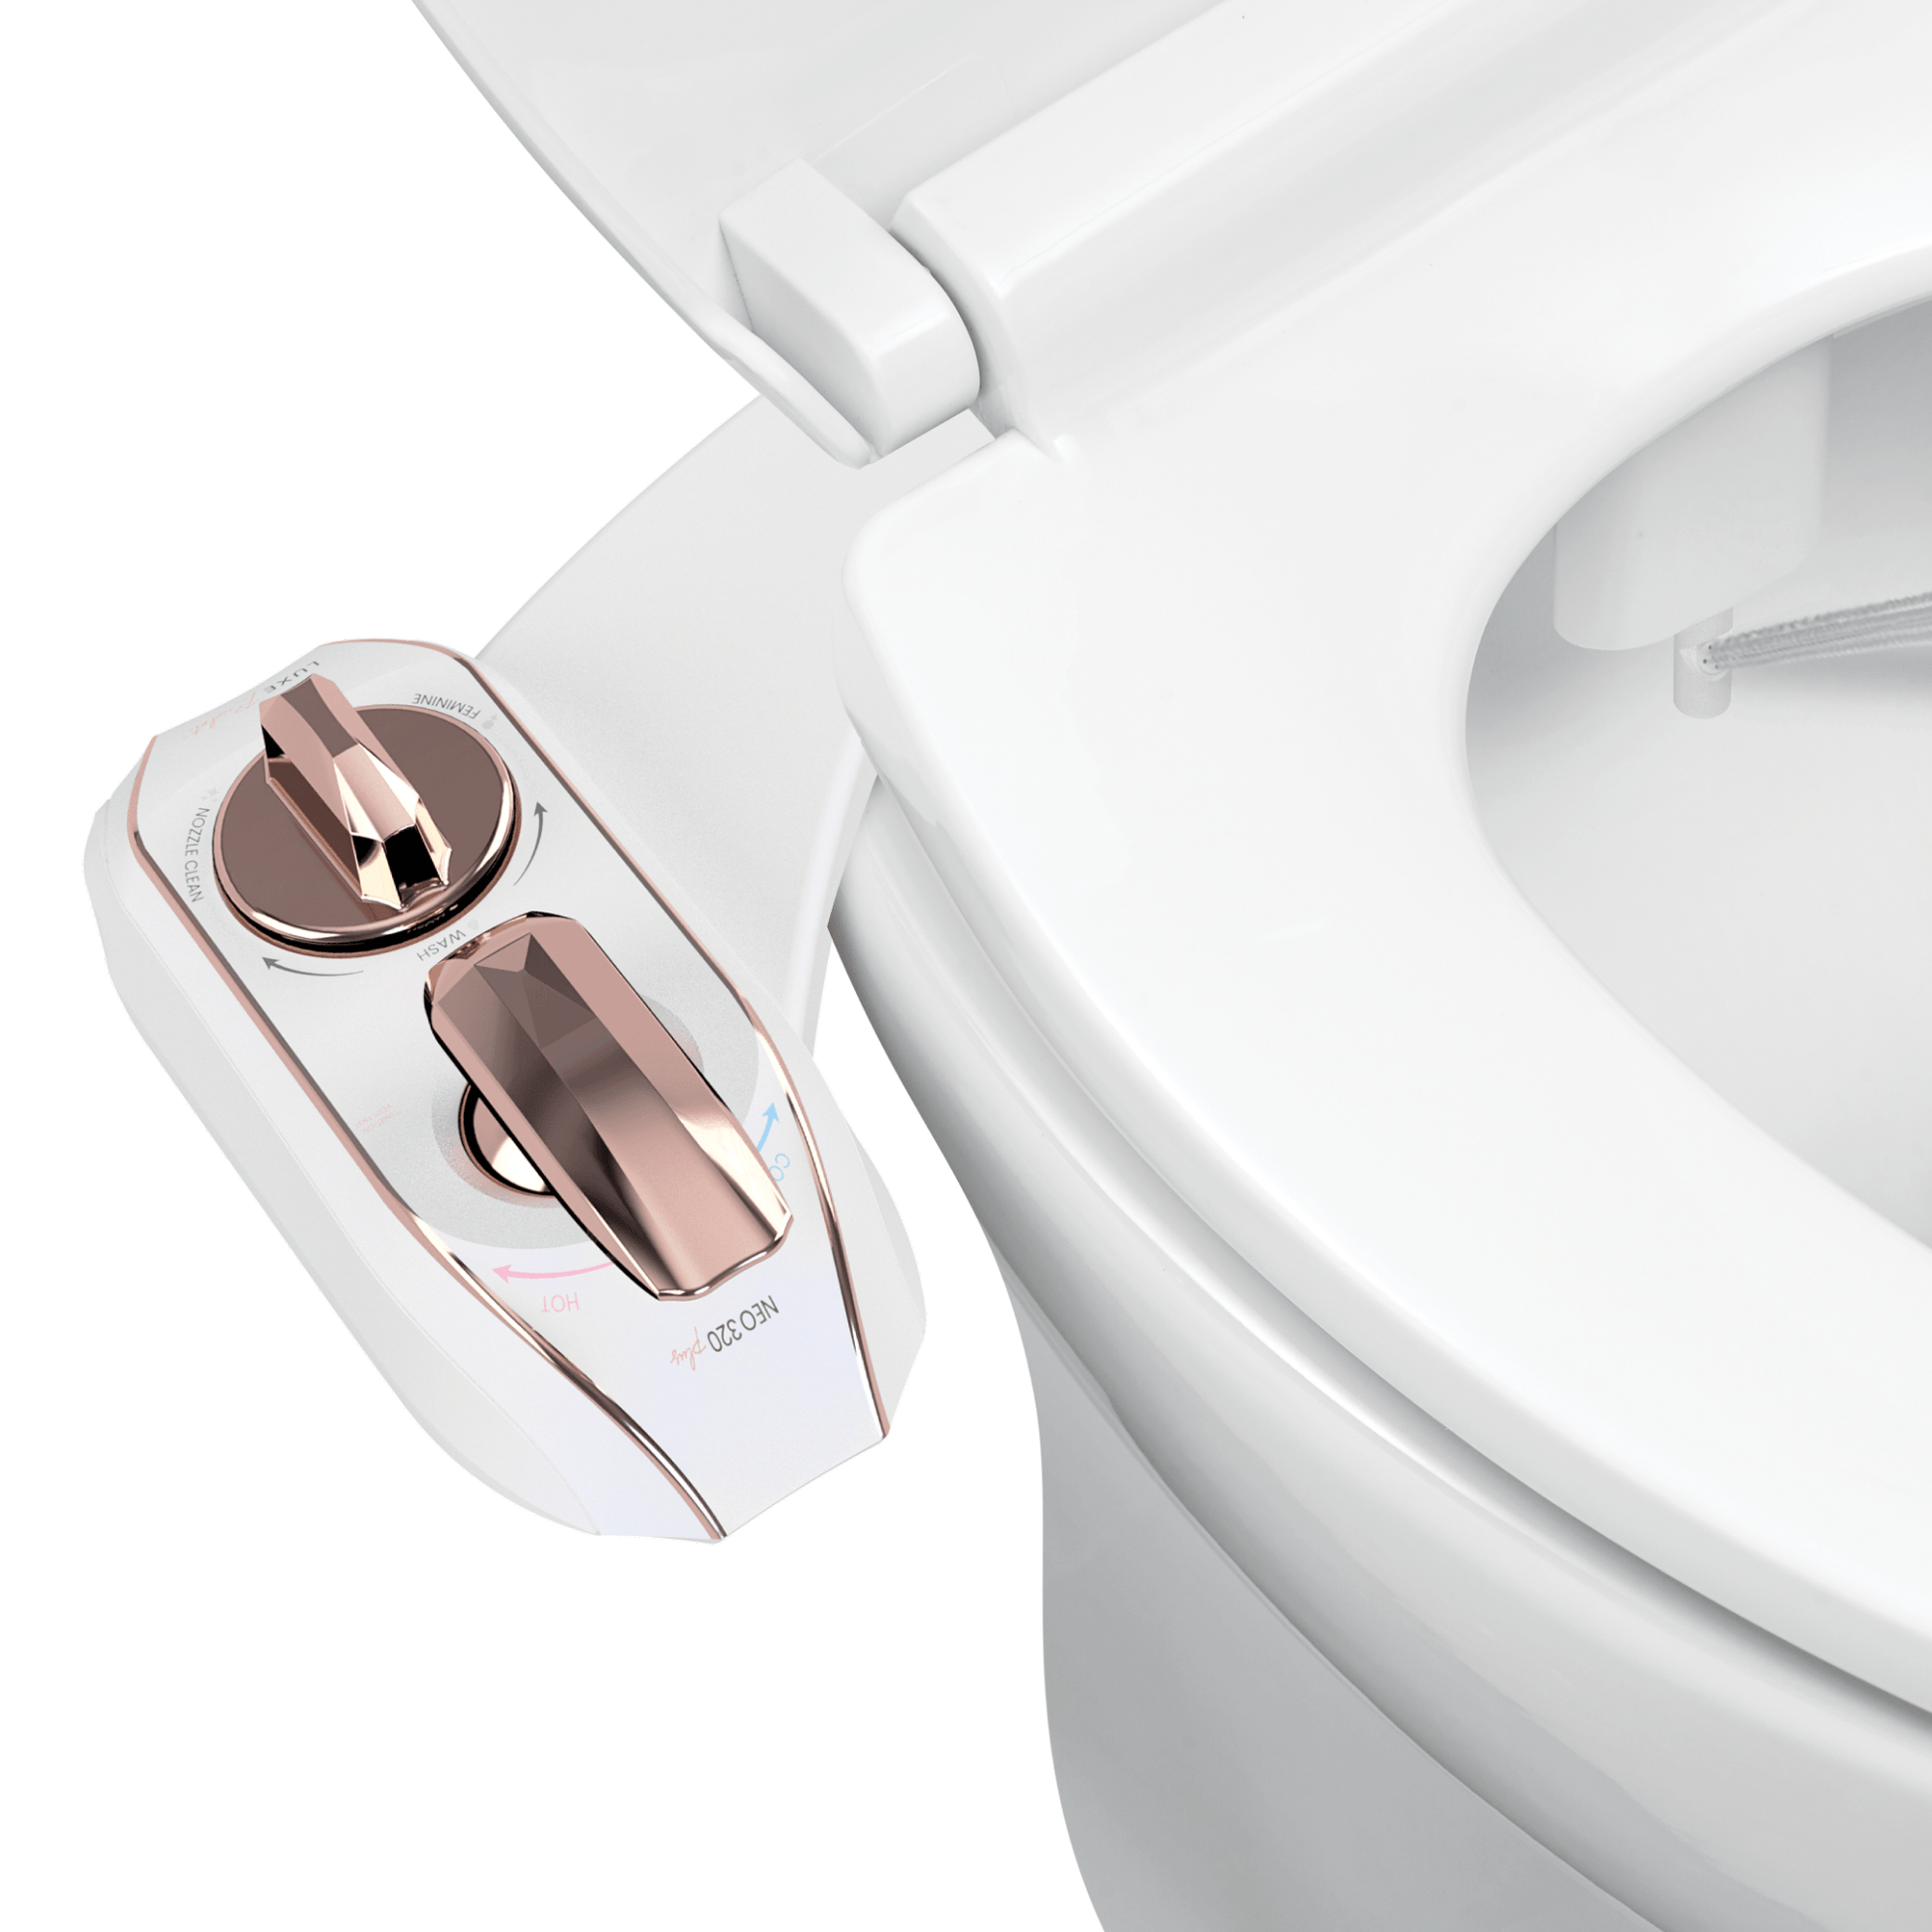 NEO 320 Plus Rose Gold installed on a toilet with water spraying from nozzles